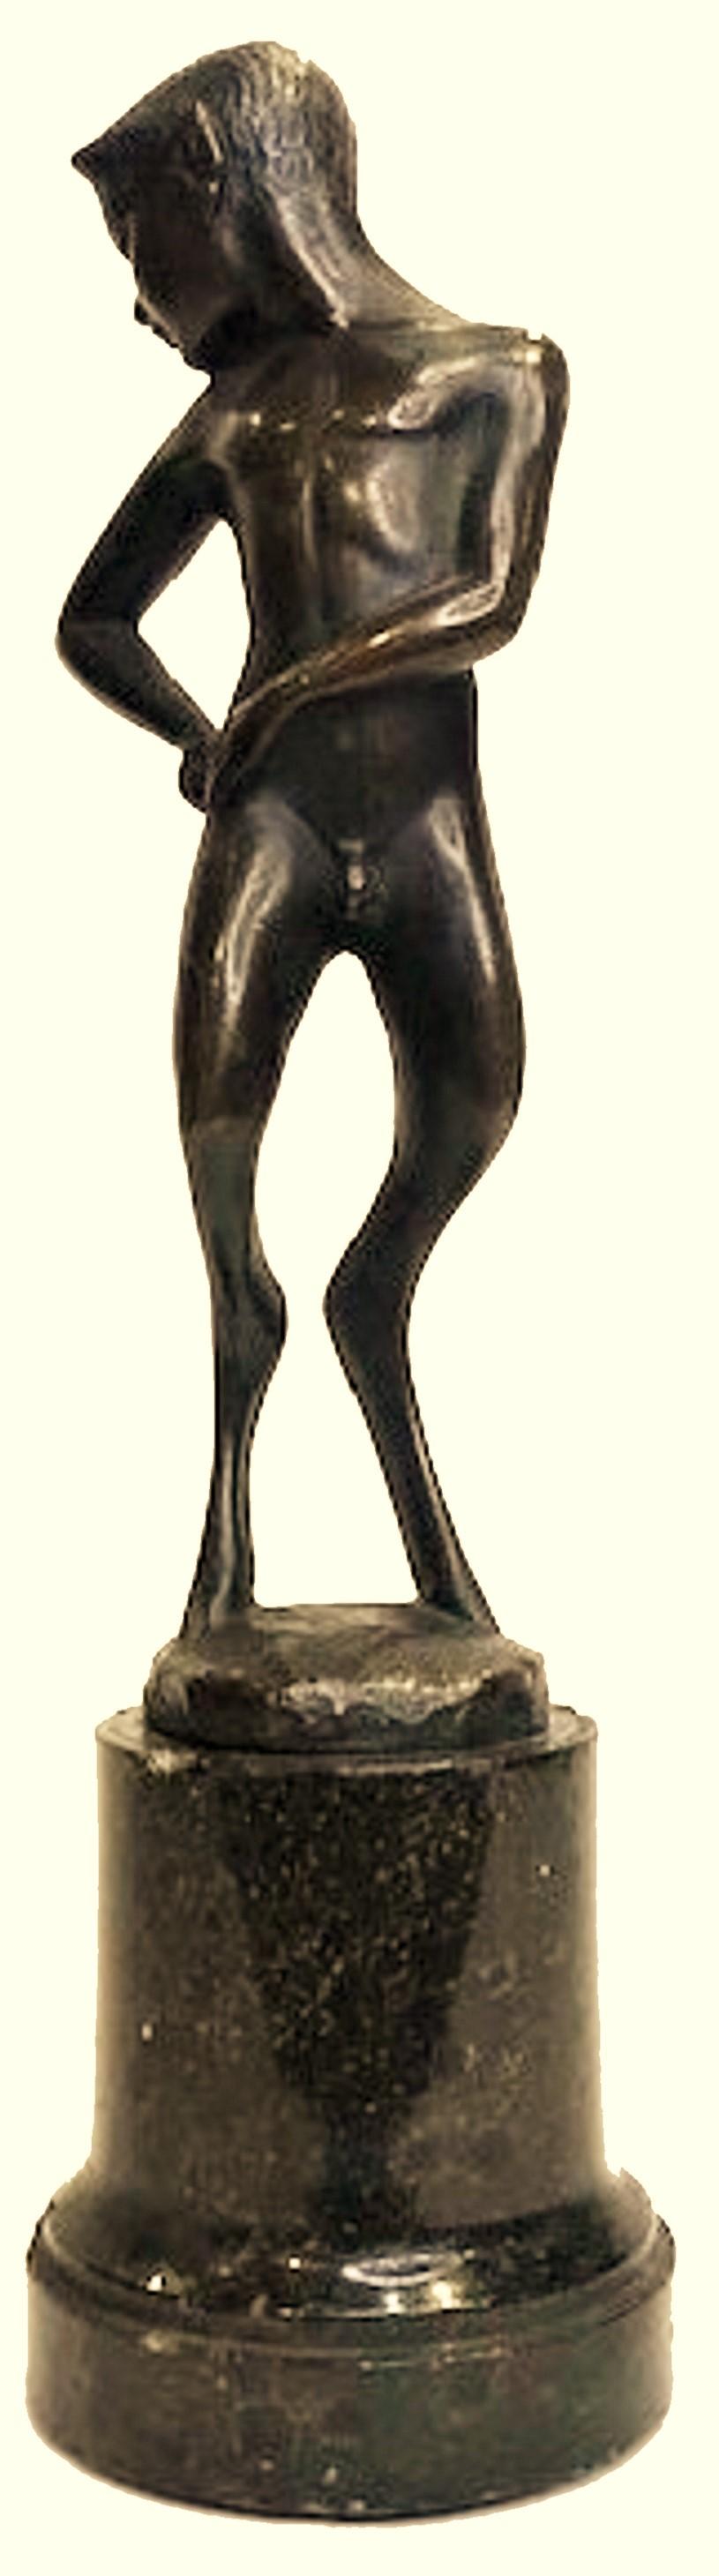 Austrian Jugenstil Patinated Bronze Sculpture of Fawn Youth, Ca. 1900 For Sale 3